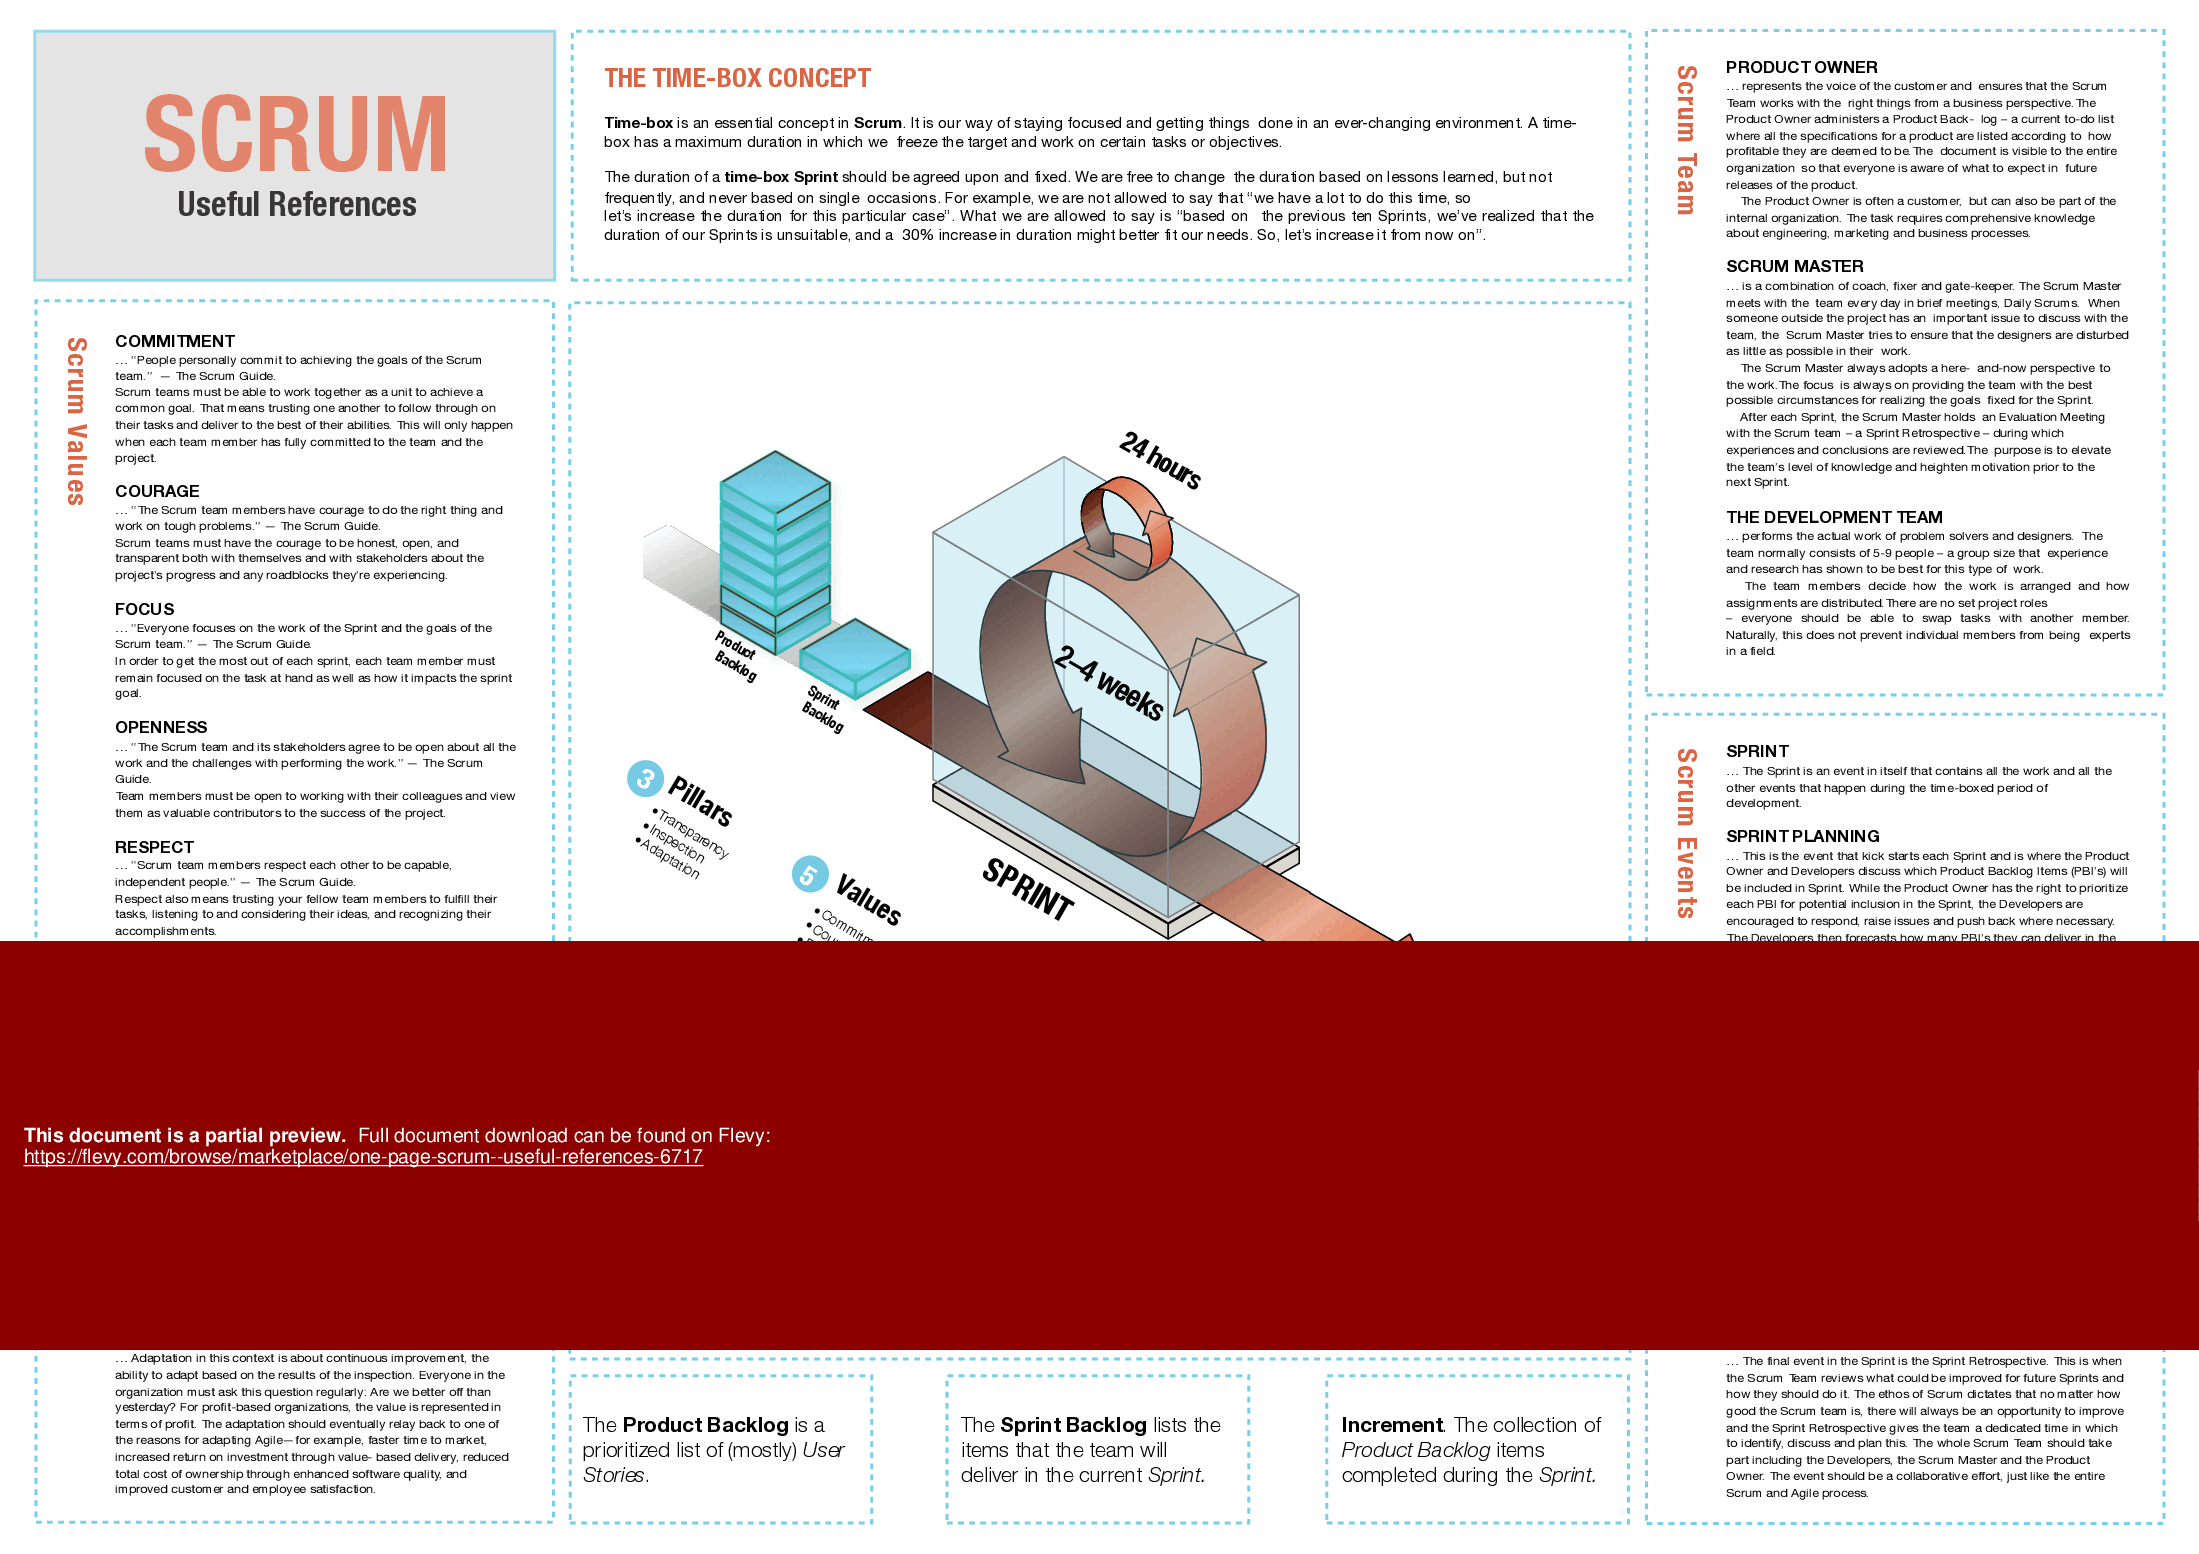 One-Page SCRUM - Useful References